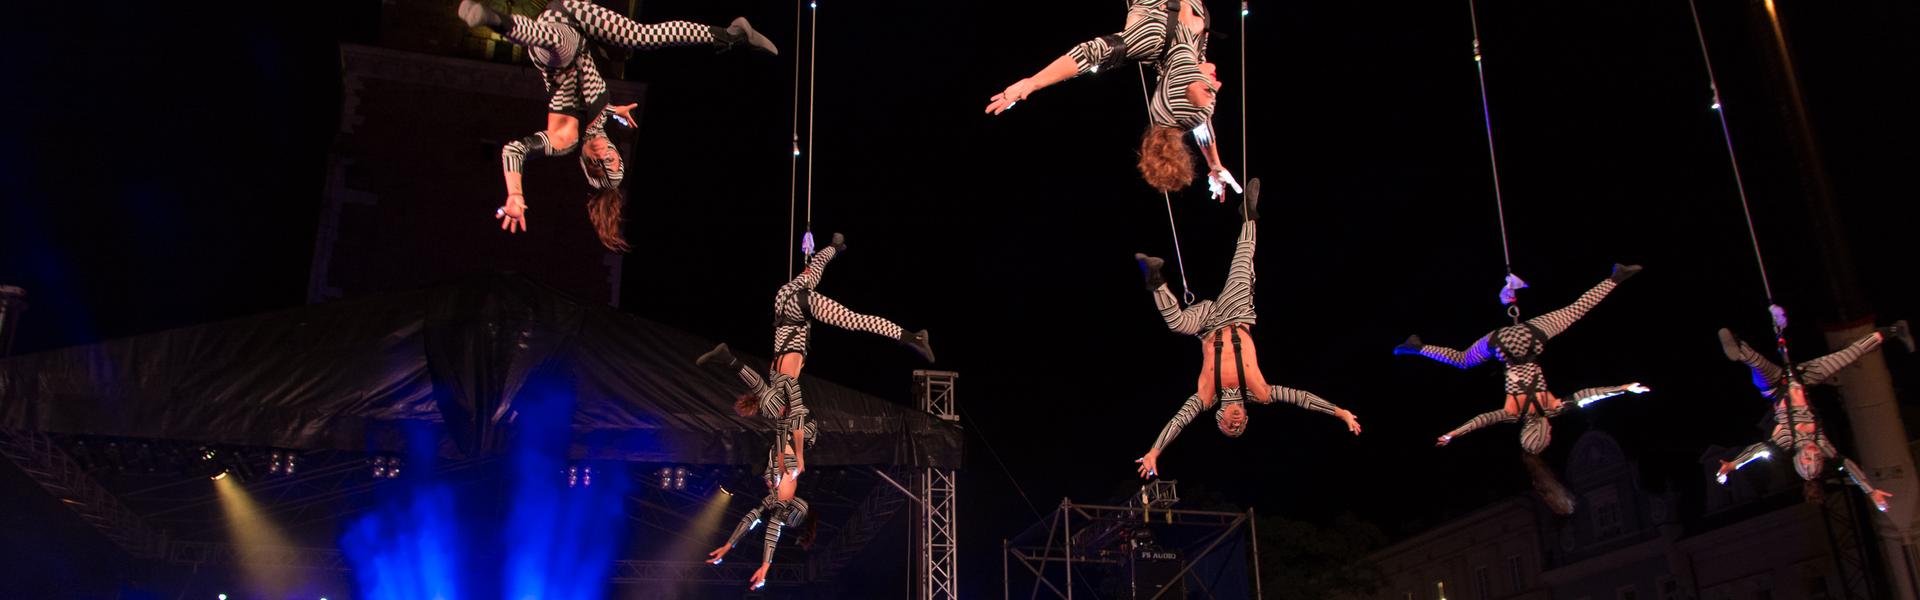 Disguised actors hanging upside down on ropes above the audience during a theater festival. It is dark, next to it there is a stage lit in blue.